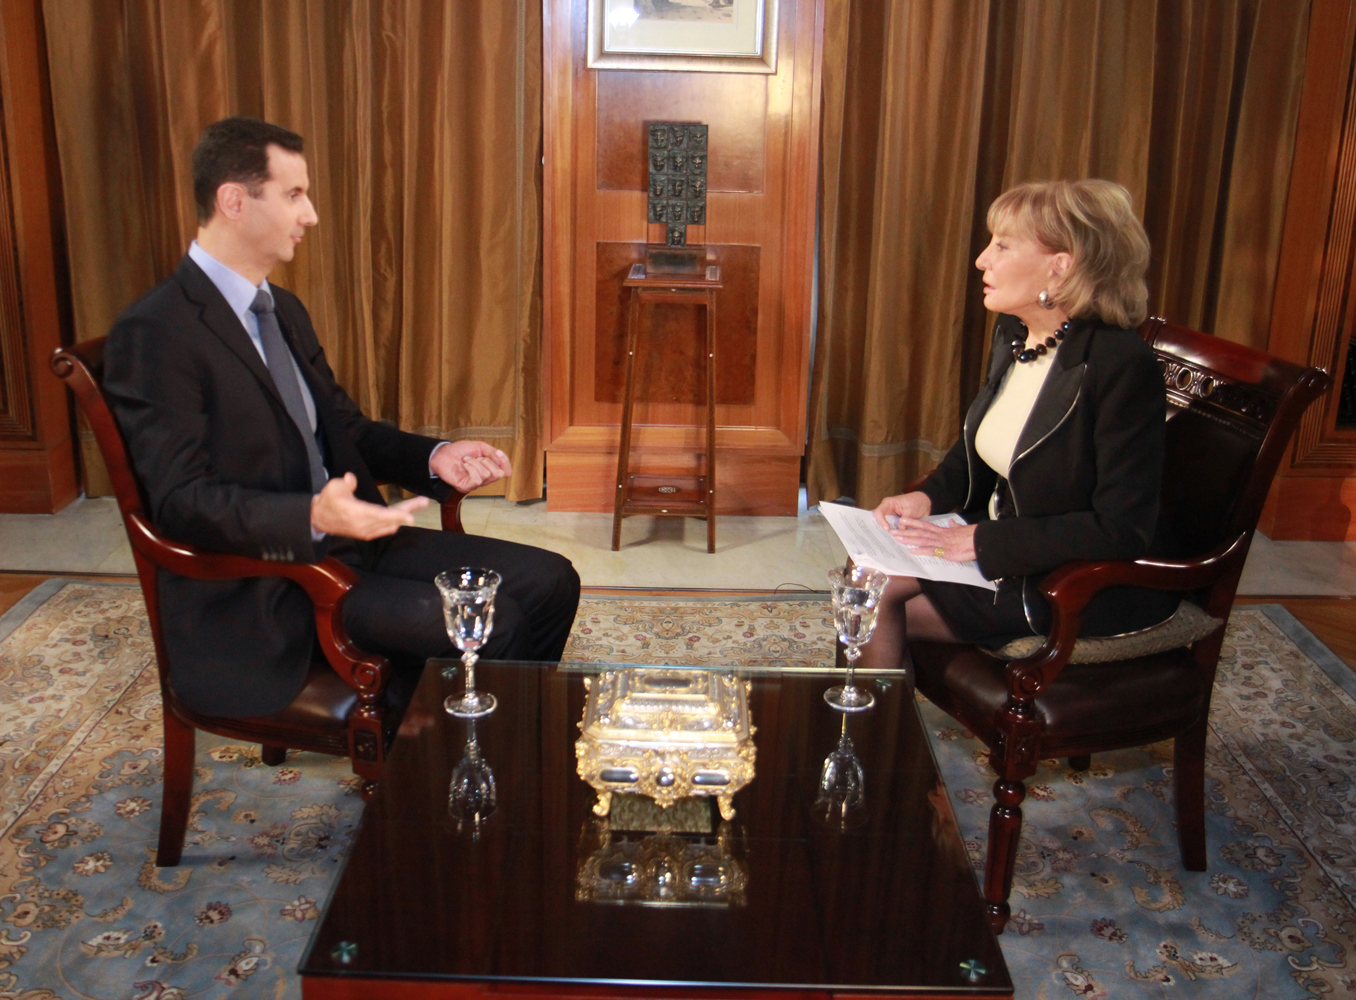 Syrian President Bashar Al-Assad with ABC News Anchor Barbara Walters for his first on-camera interview with an American journalist since the uprising in Syria began. The interview aired across ABC platforms on Dec. 7, 2011.